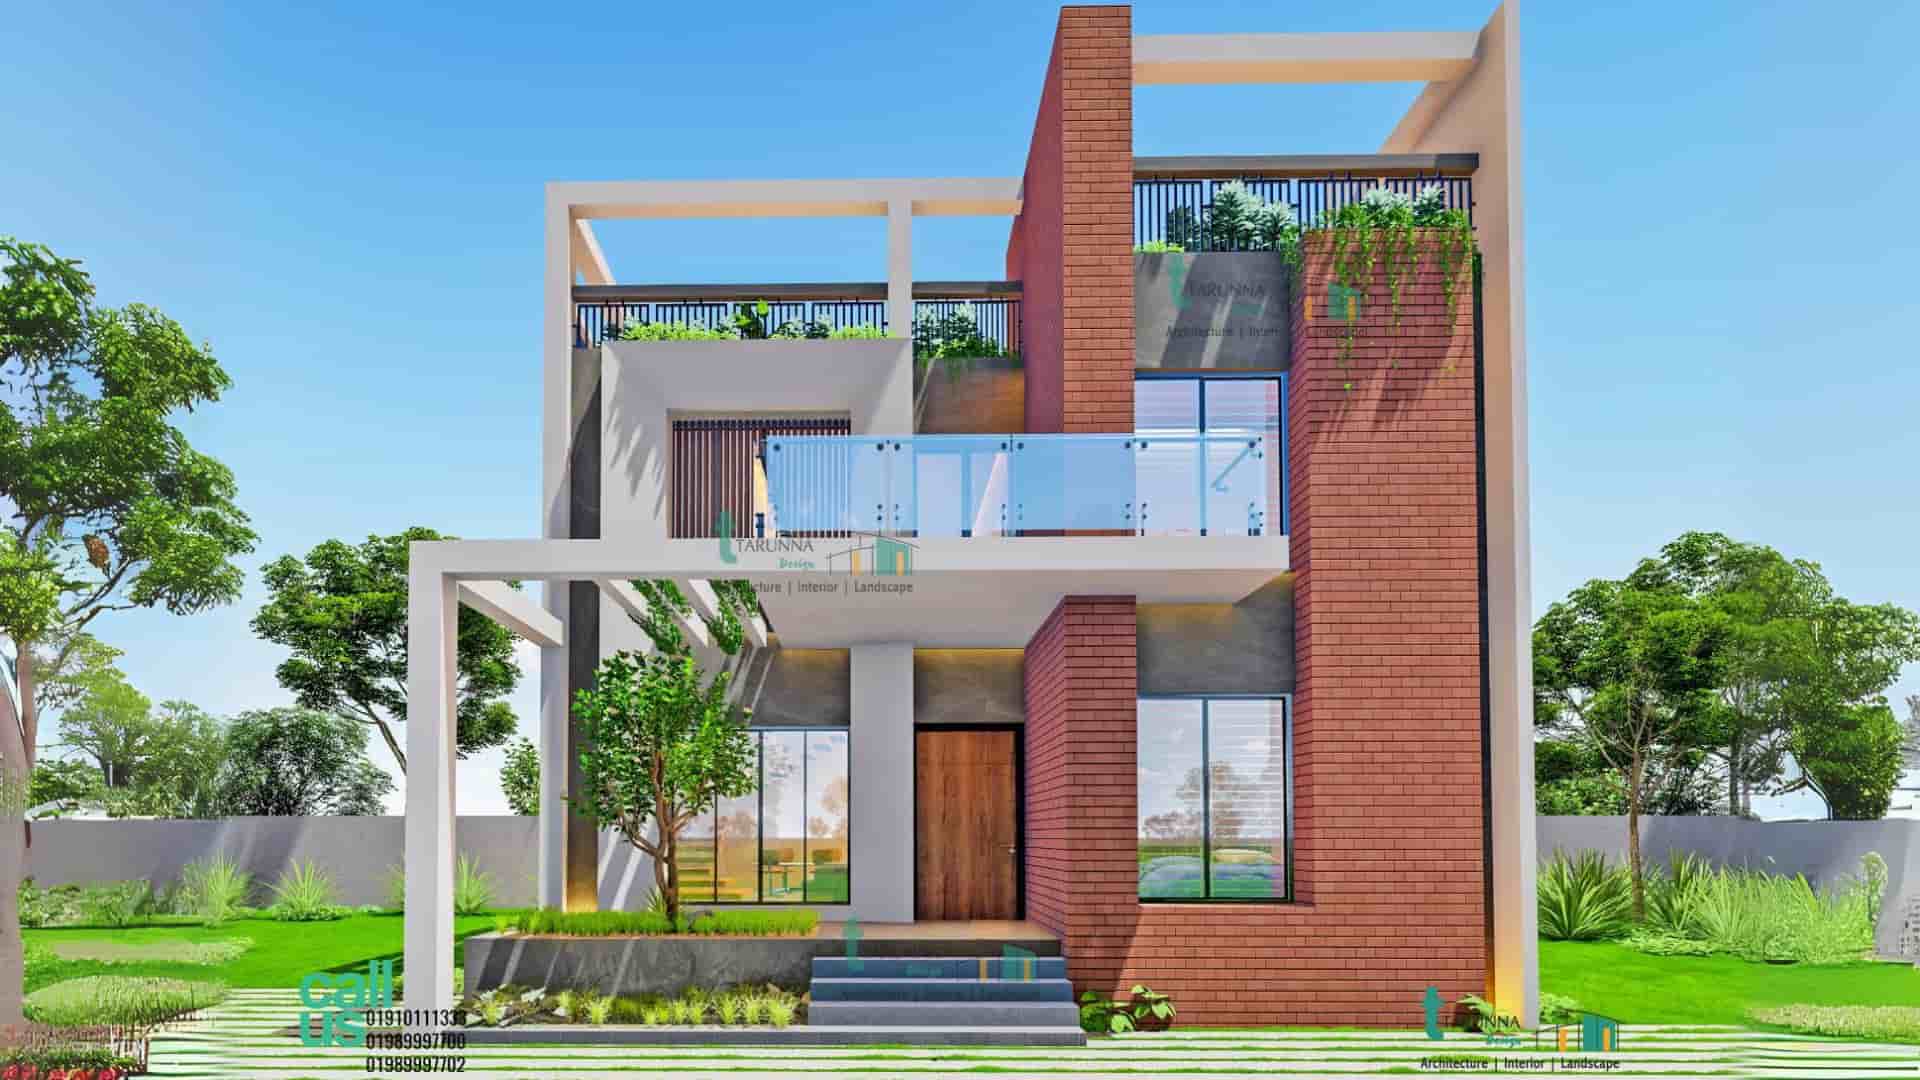 Architecture Firm in Dhaka